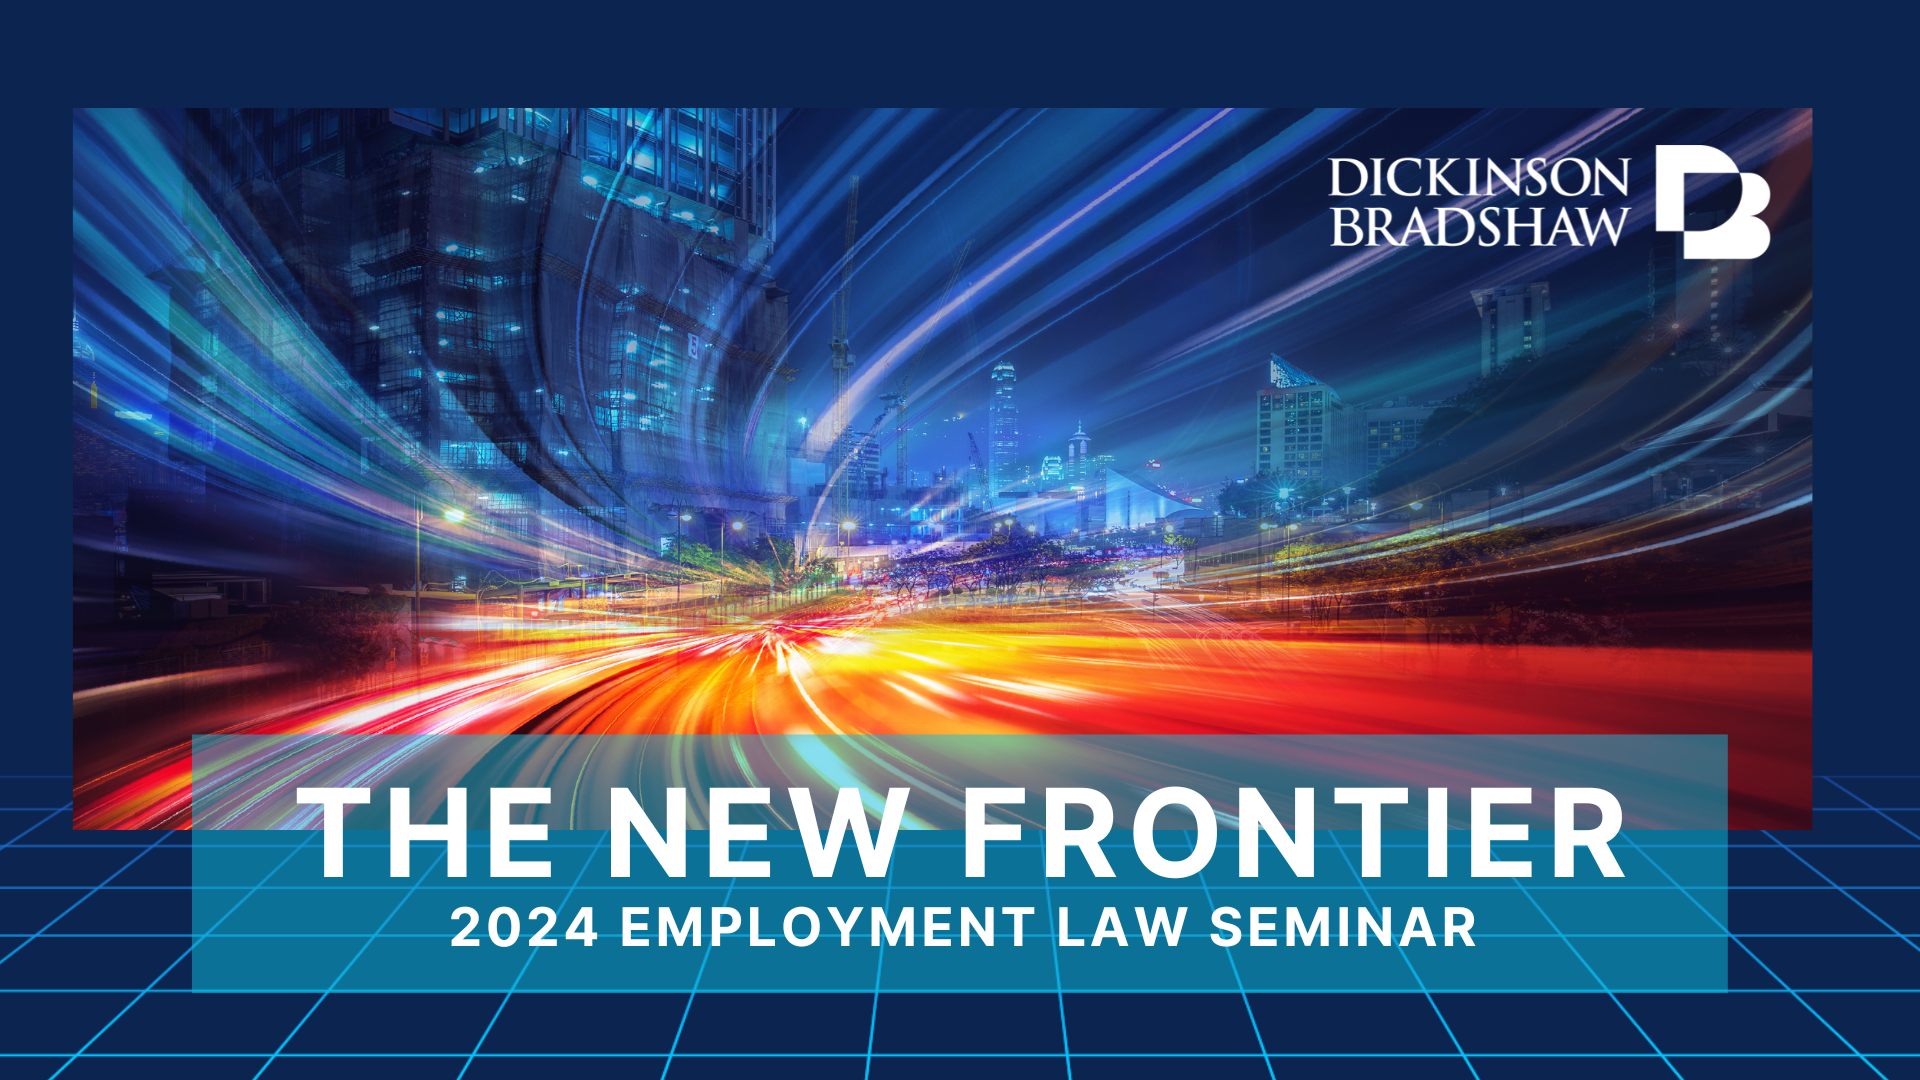 The New Frontier: 2024 Employment Law Seminar